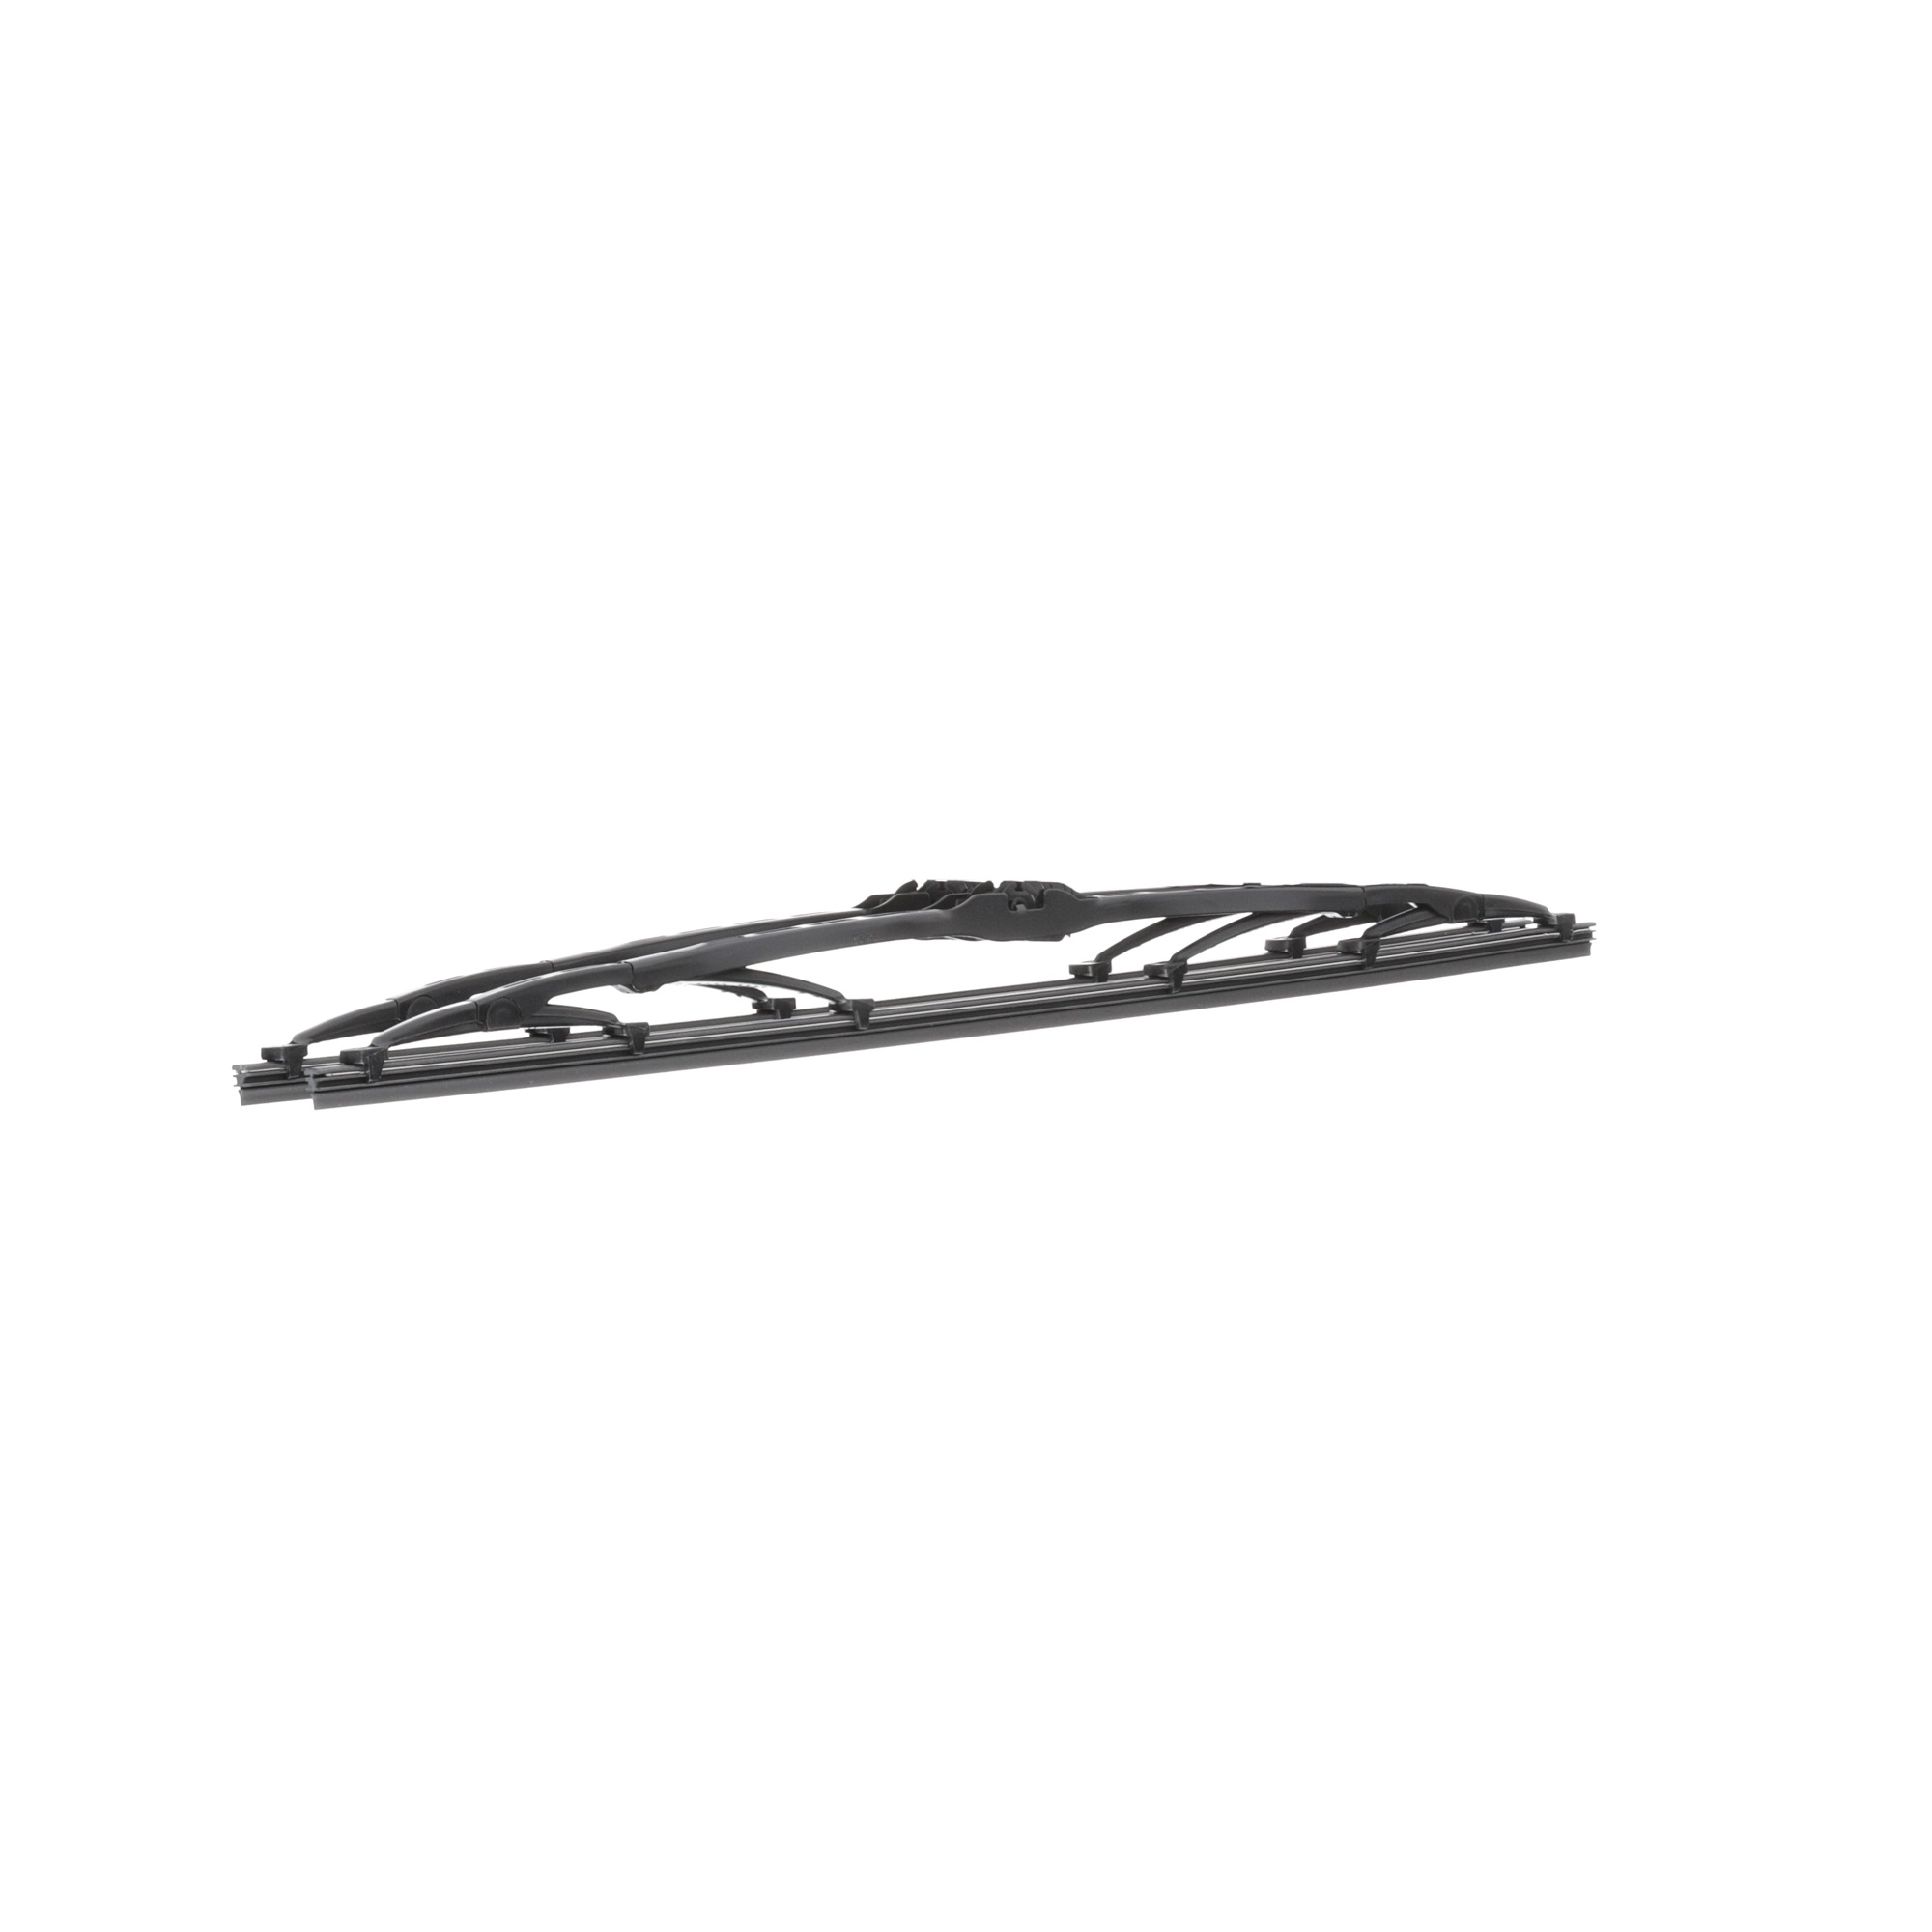 VALEO COMPACT 576006 Wiper blade 480 mm Front, Standard